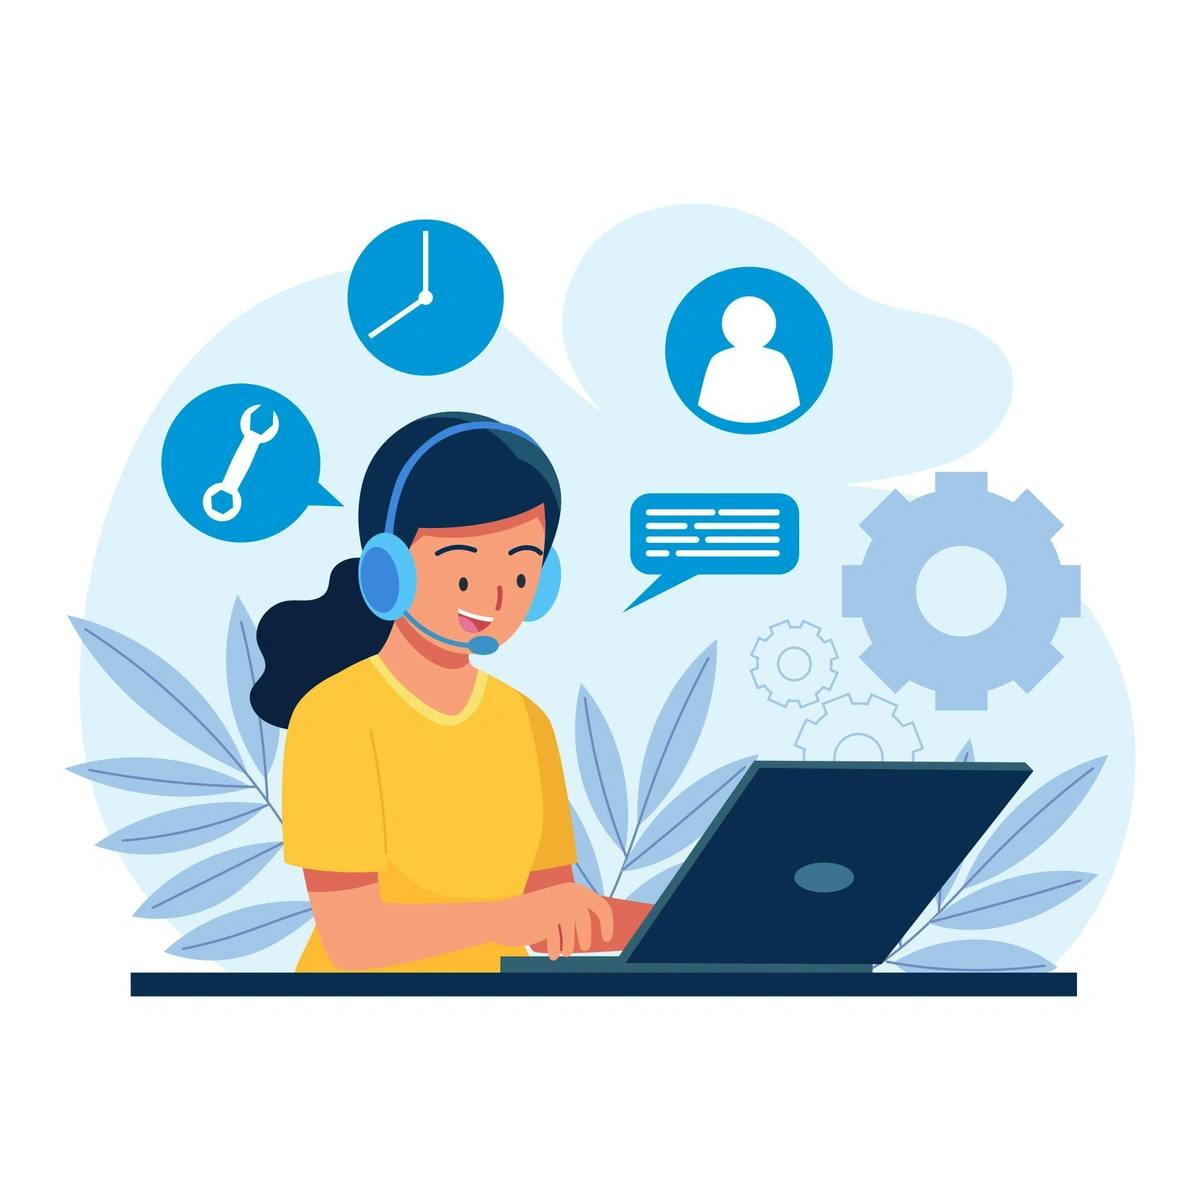 Illustration of a female customer support representative wearing headphones and speaking into a microphone, working on a laptop with icons representing time, user profile, wrench, and speech bubbles around her, symbolizing customer service tools and